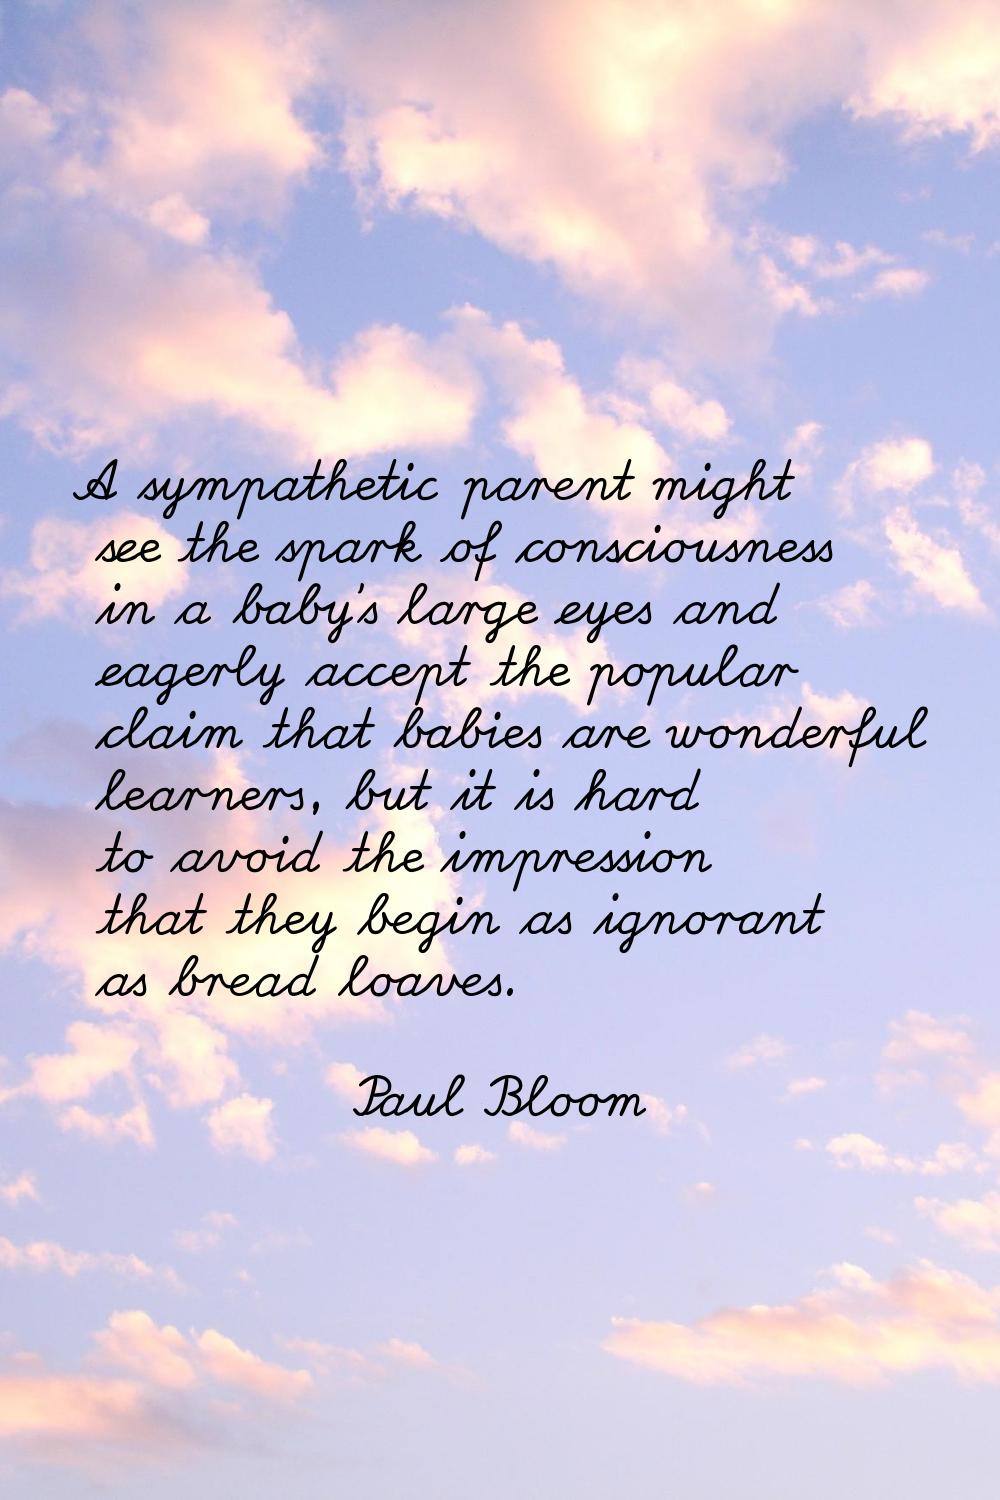 A sympathetic parent might see the spark of consciousness in a baby's large eyes and eagerly accept